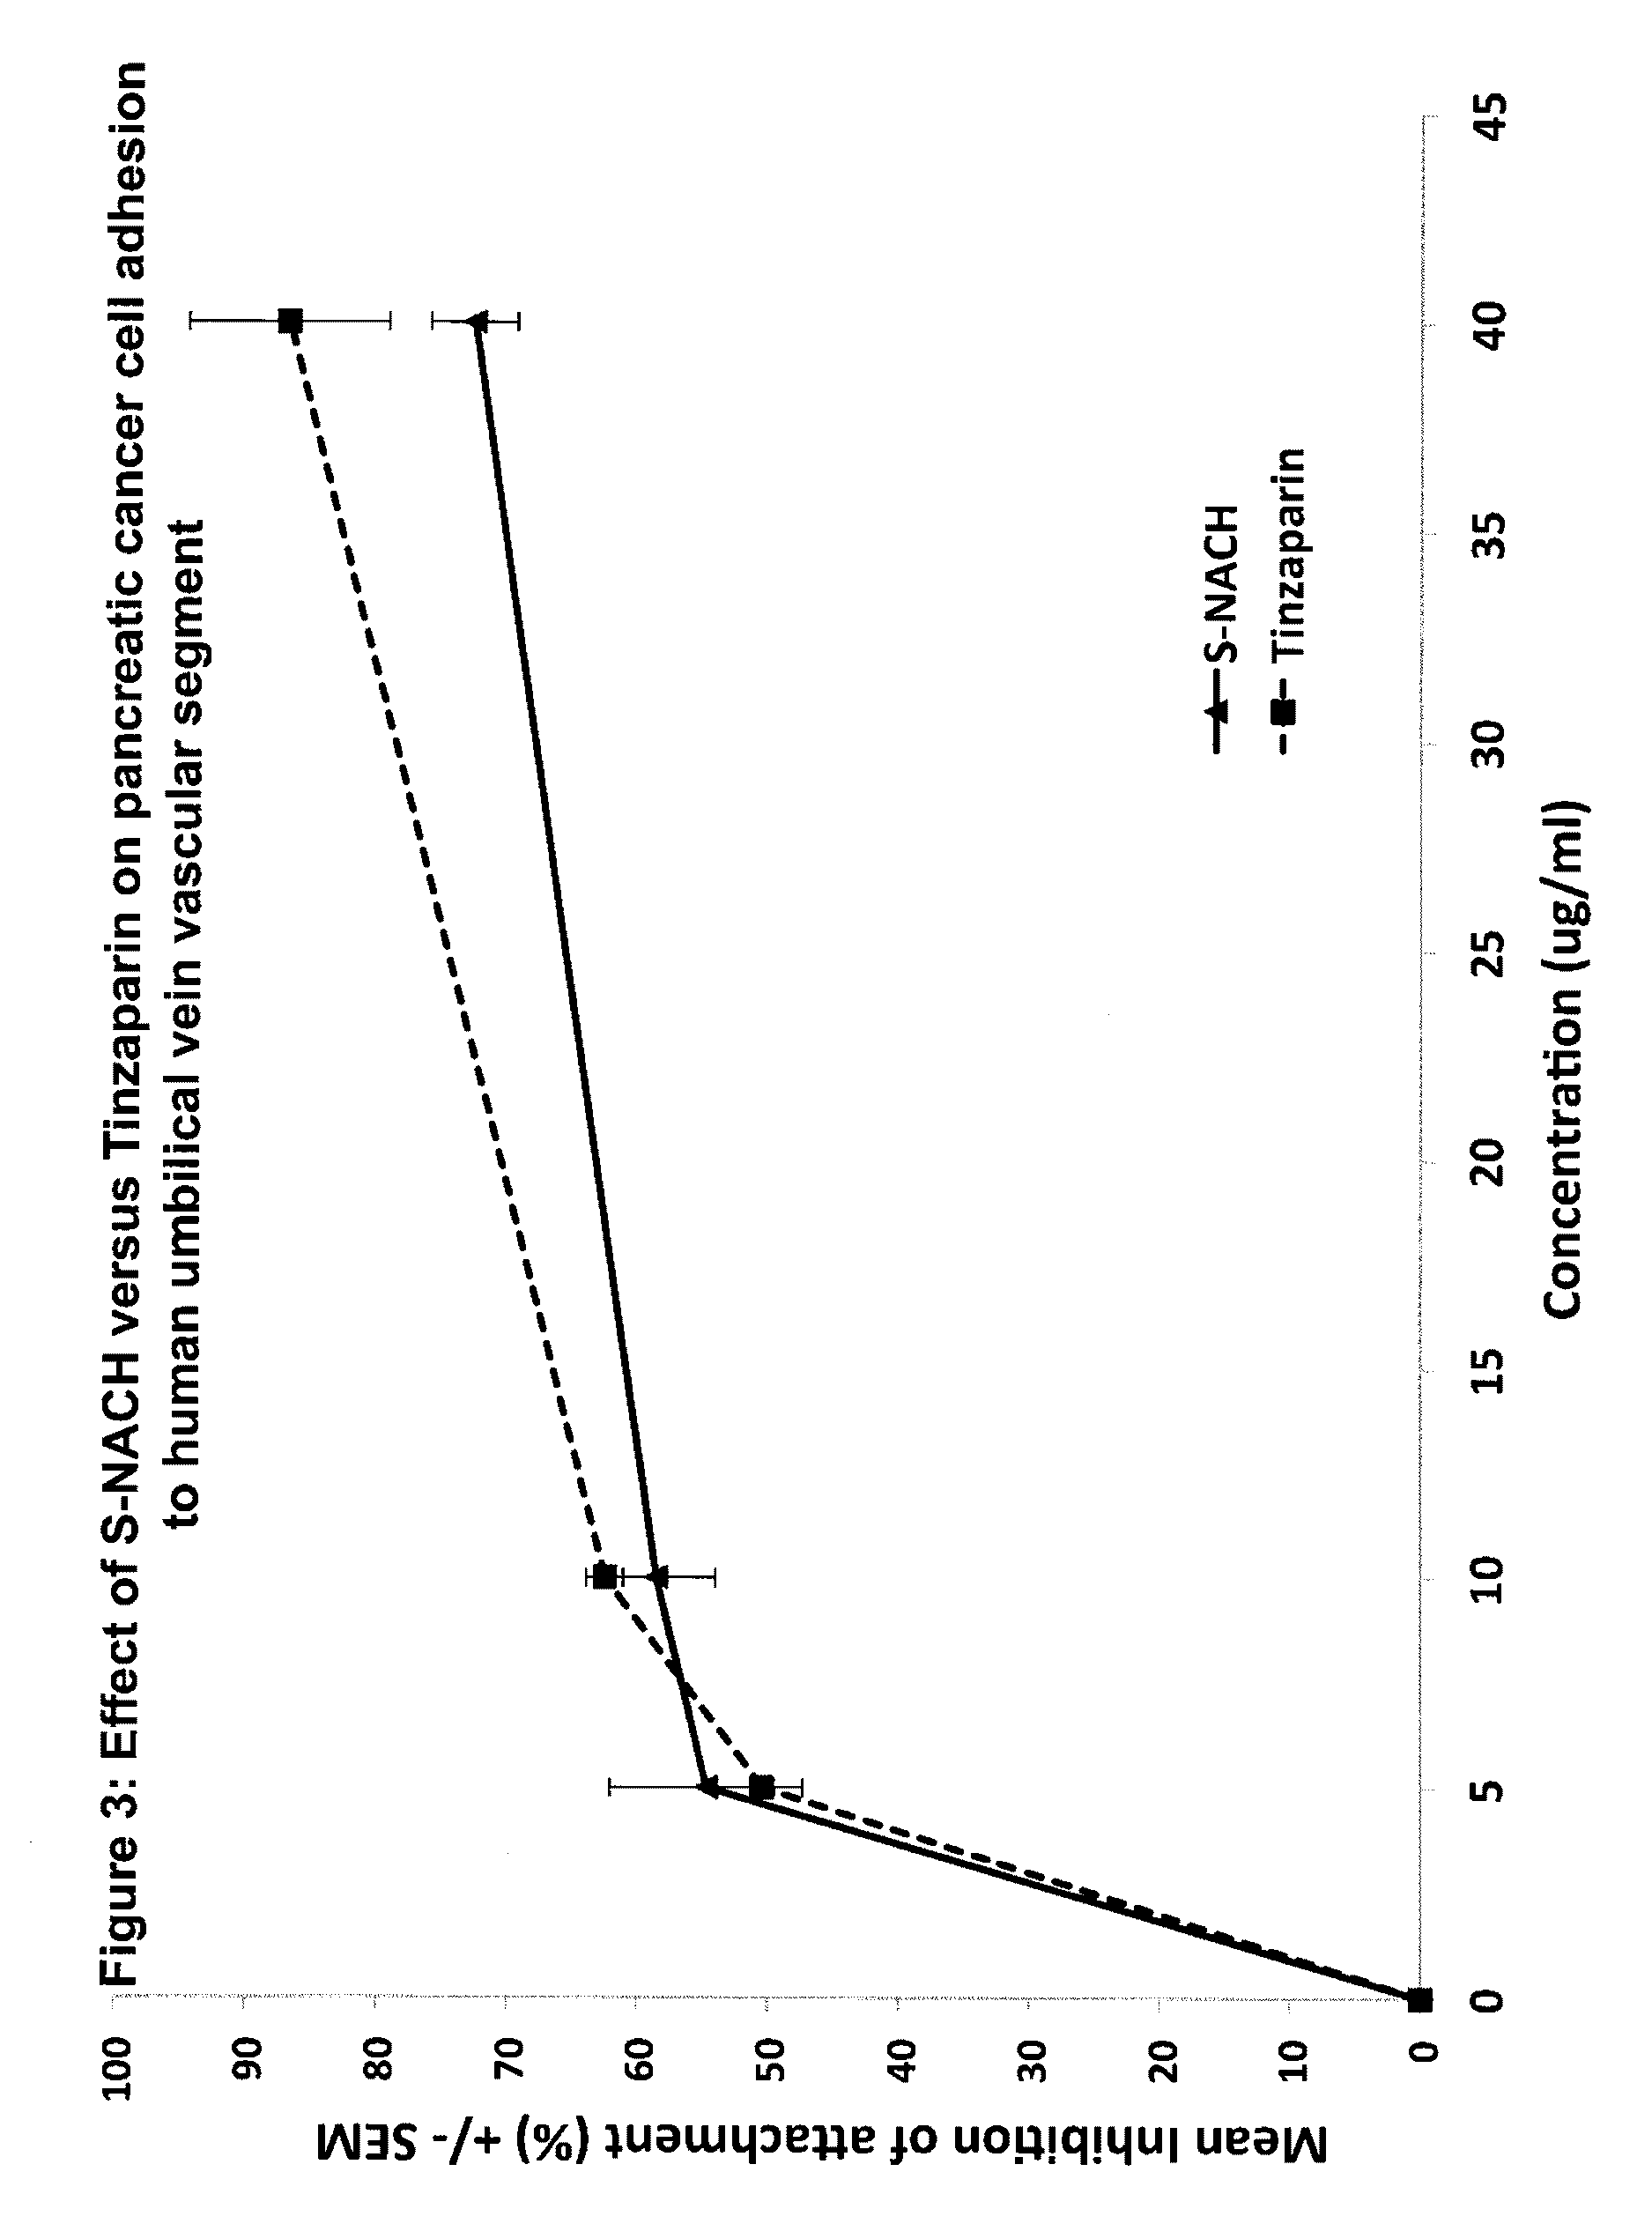 Composition and method for sulfated non-anticoagulant low molecular weight heparins in cancer and tumor metastasis